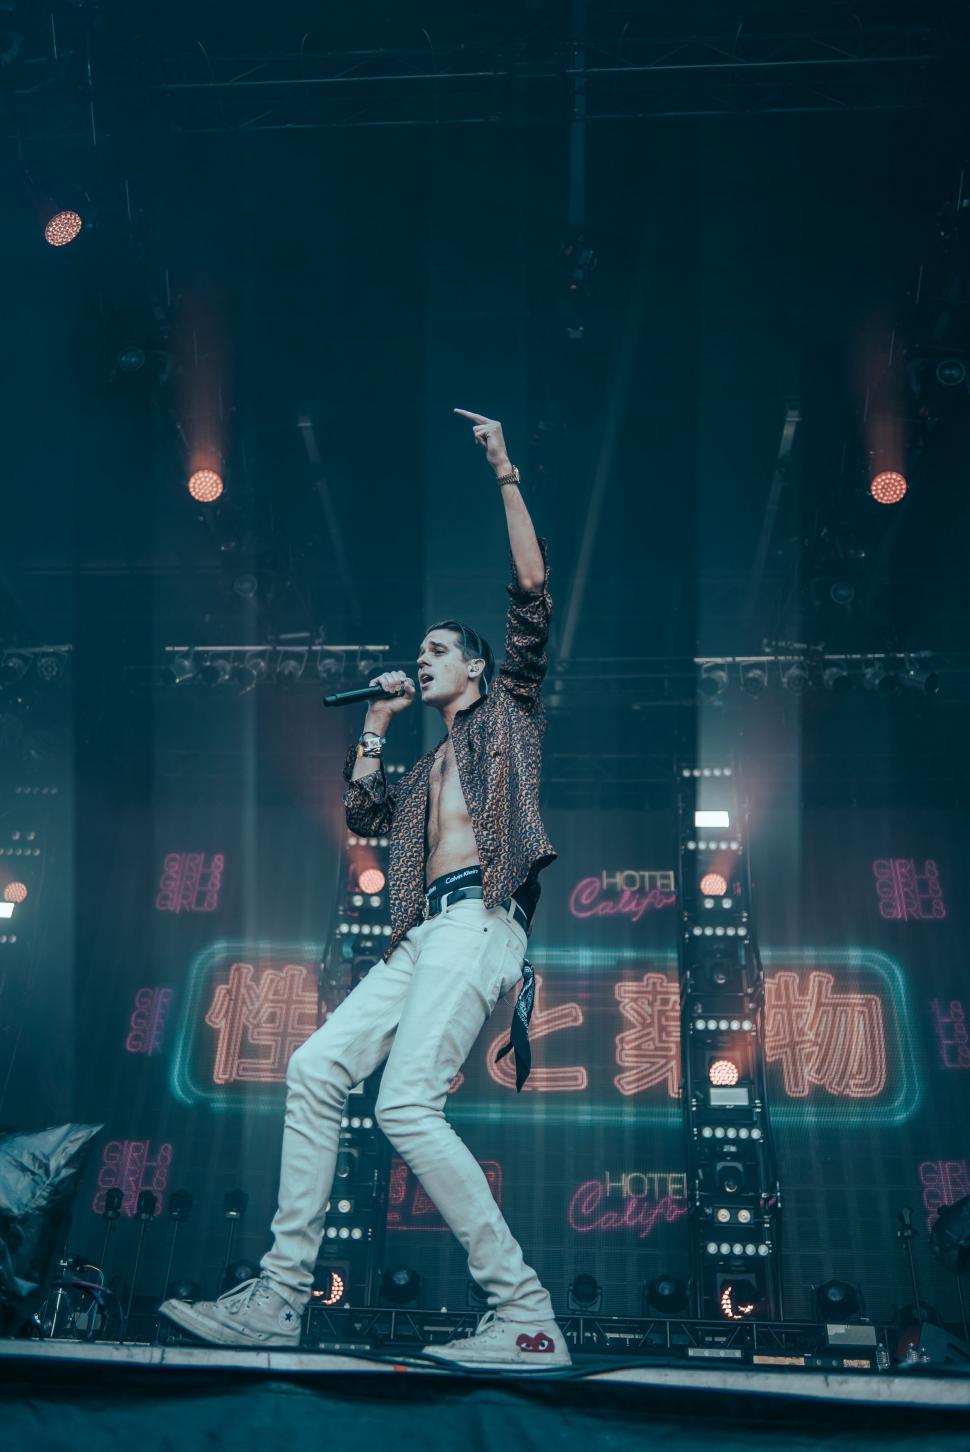 Free Image of Man Standing on Top of Stage Holding Microphone 